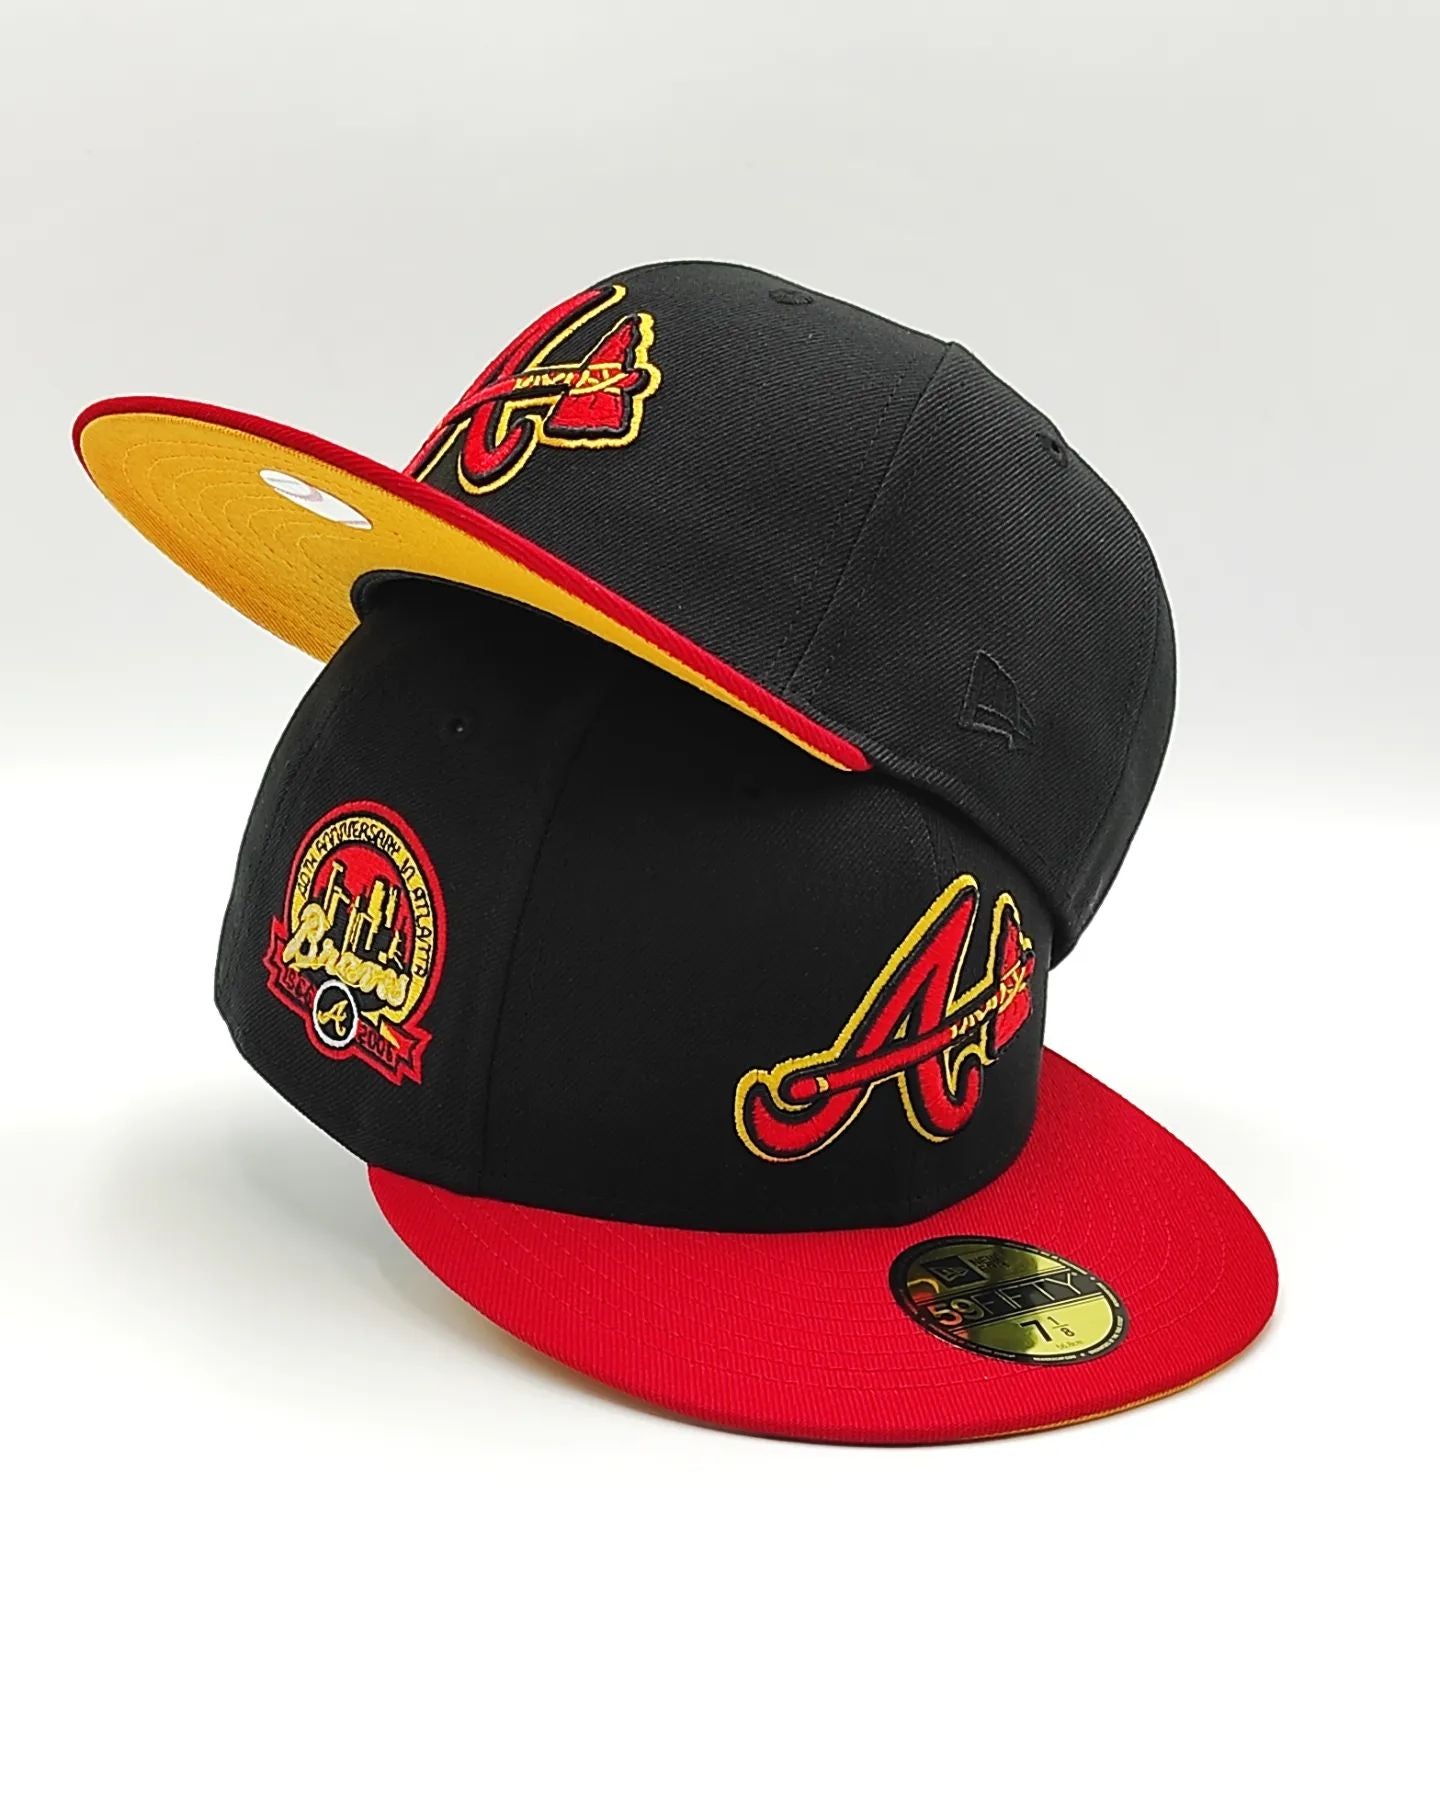 Exclusiva New Era 59Fifty Cool Fashion Atlanta Braves 40th Anniversary Patch Gold UV Alternate Hat - Black, Red, Gold